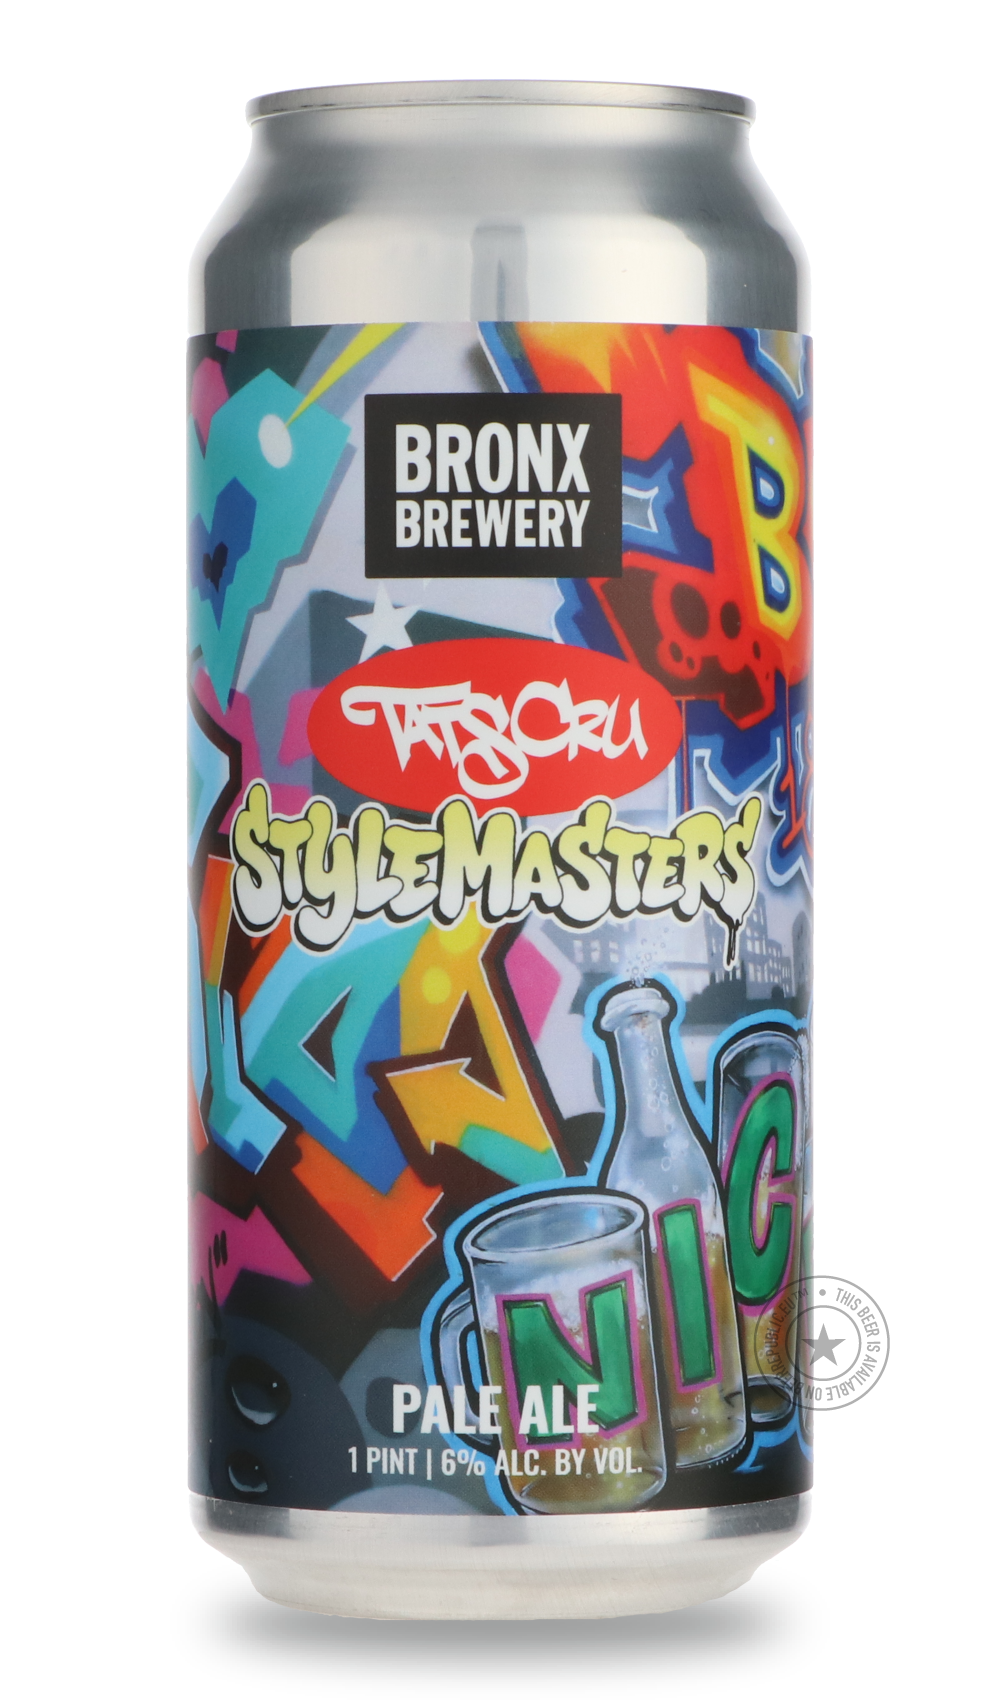 -Bronx- StyleMasters-Pale- Only @ Beer Republic - The best online beer store for American & Canadian craft beer - Buy beer online from the USA and Canada - Bier online kopen - Amerikaans bier kopen - Craft beer store - Craft beer kopen - Amerikanisch bier kaufen - Bier online kaufen - Acheter biere online - IPA - Stout - Porter - New England IPA - Hazy IPA - Imperial Stout - Barrel Aged - Barrel Aged Imperial Stout - Brown - Dark beer - Blond - Blonde - Pilsner - Lager - Wheat - Weizen - Amber - Barley Wine